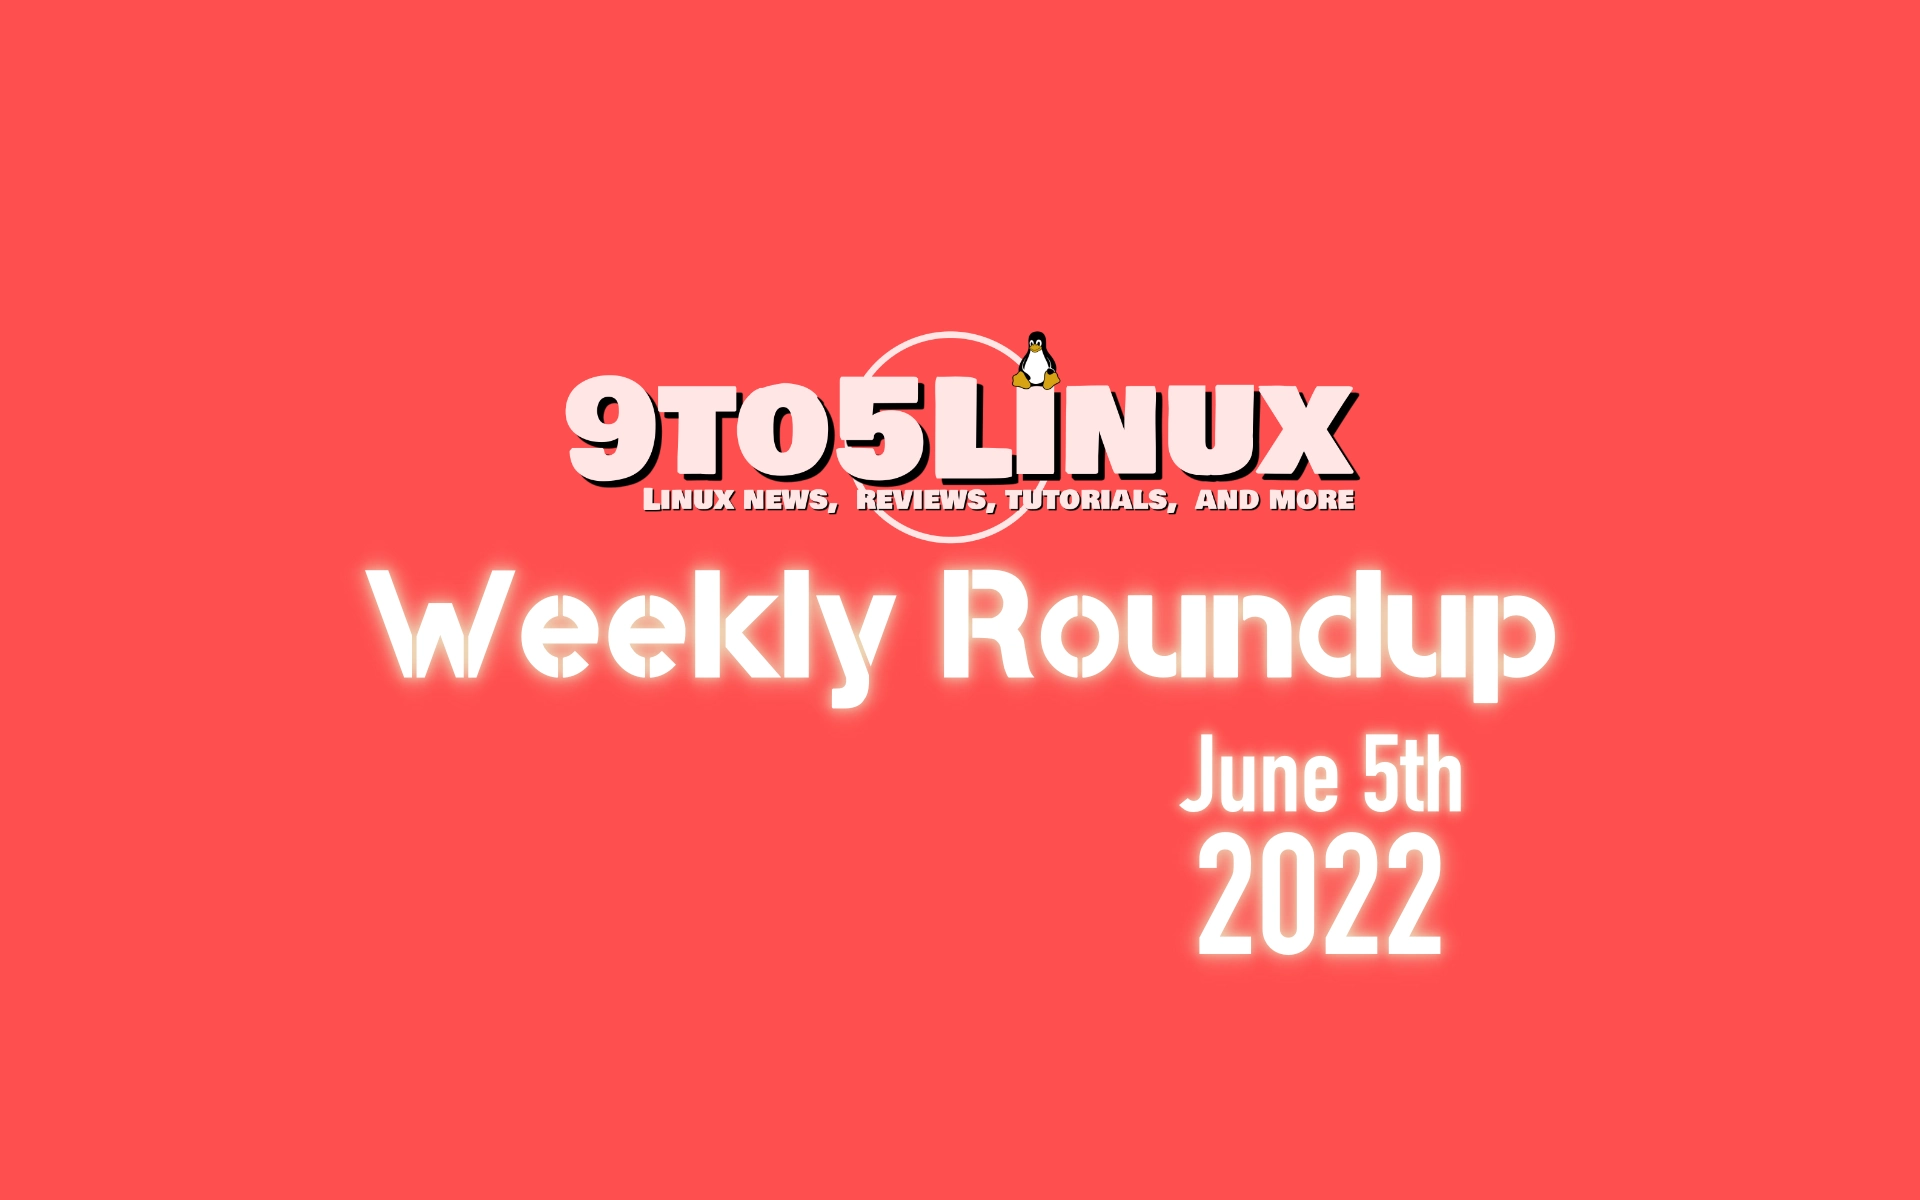 9to5Linux Weekly Roundup: June 5th, 2022